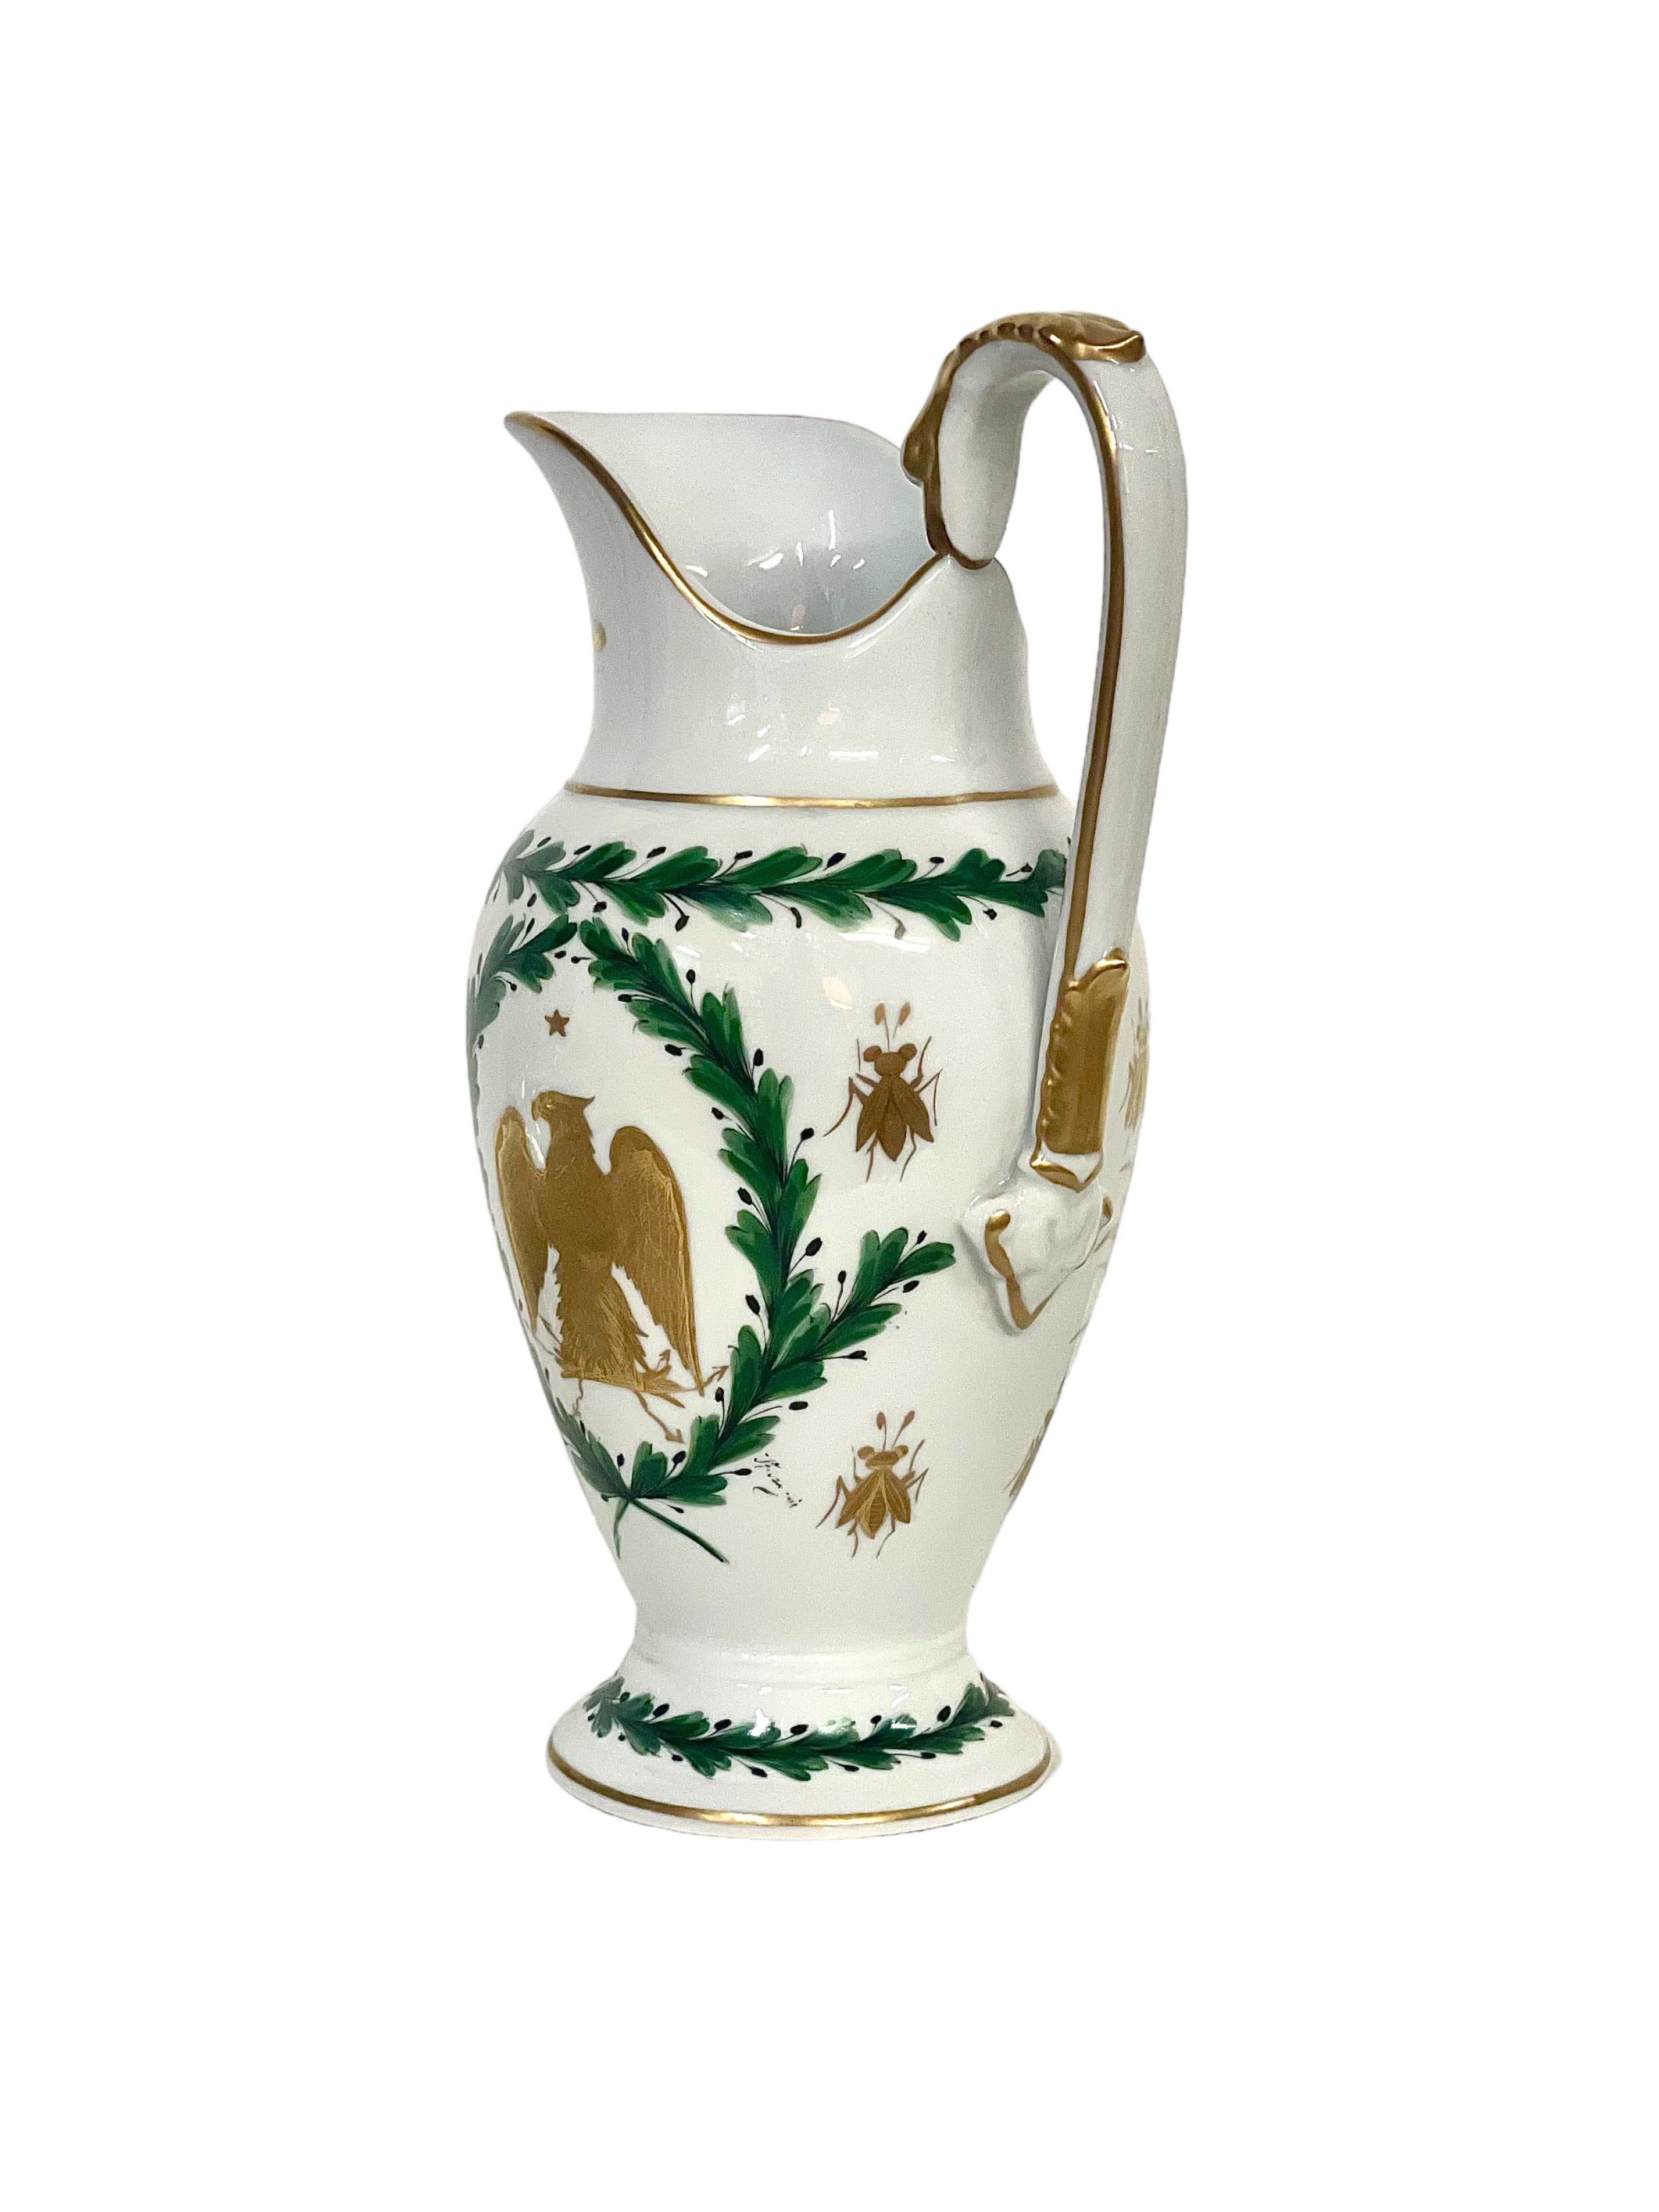 French Empire Period Paris Porcelain Basin and Pitcher with Napoleonic Emblems For Sale 3